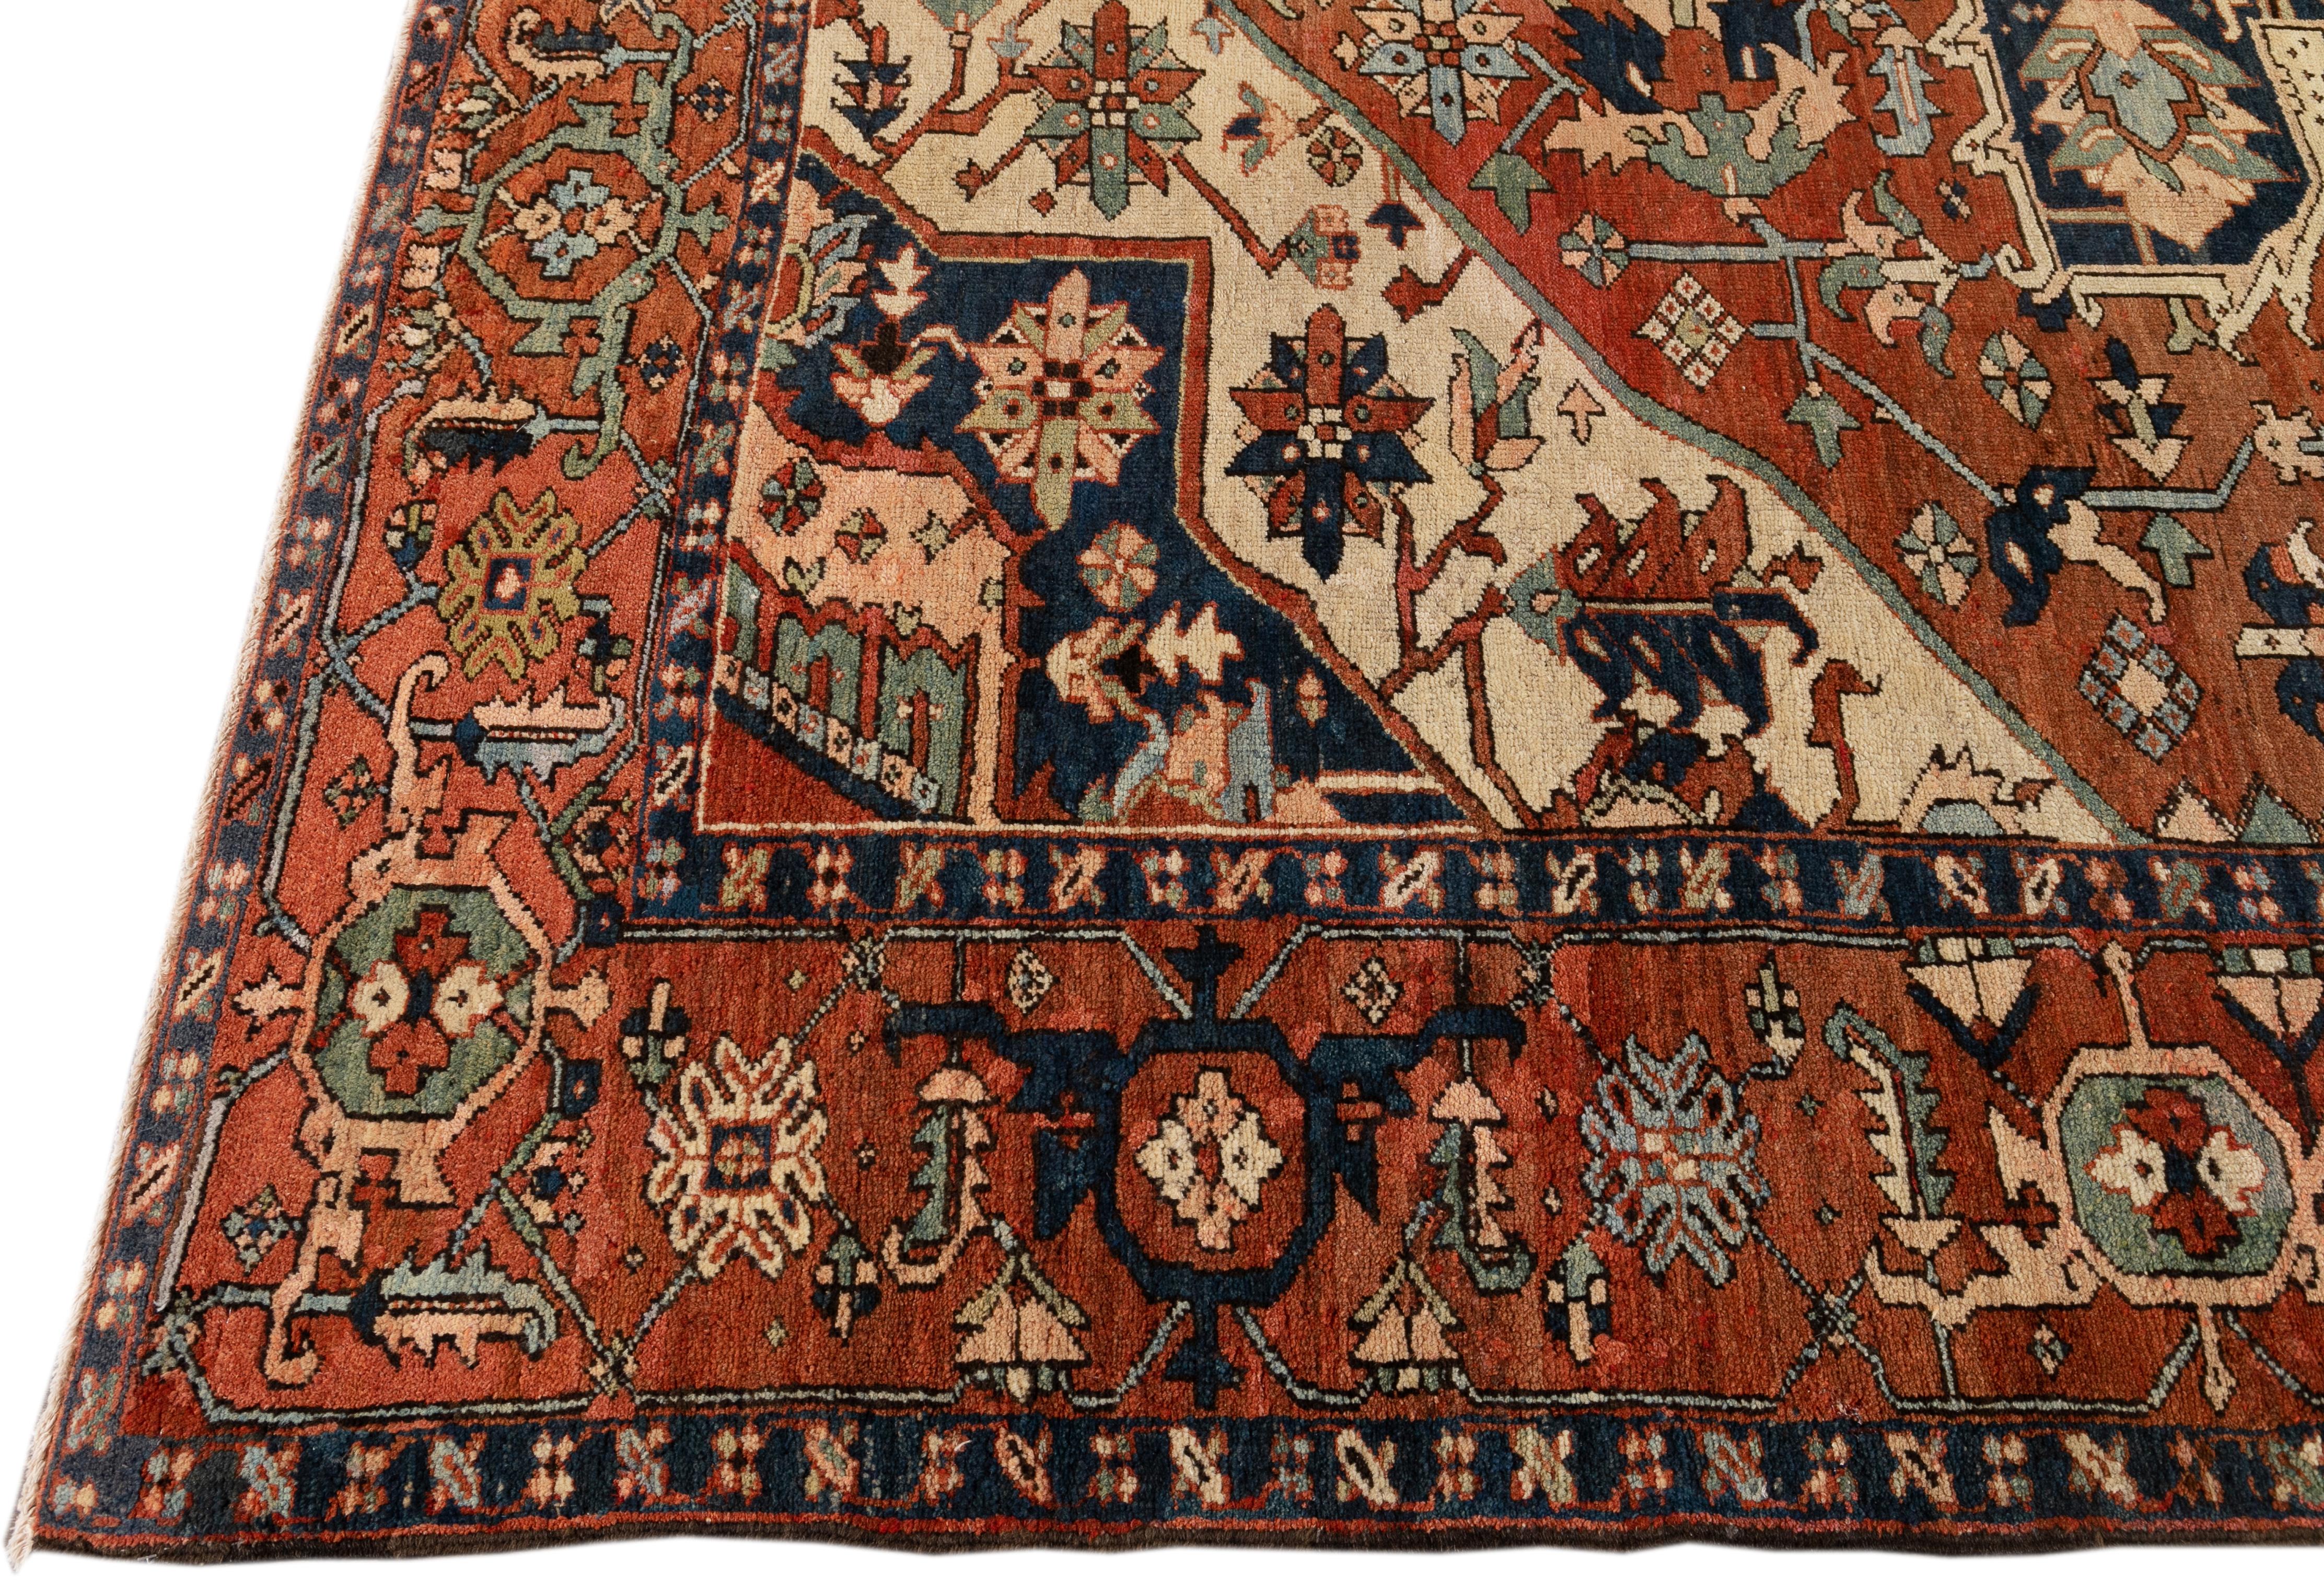 Beautiful antique Heriz hand-knotted wool rug with an orange rust color field. This Persian rug has dark blue and peach accents in a gorgeous center medallion floral design.

This rug measures: 10'1